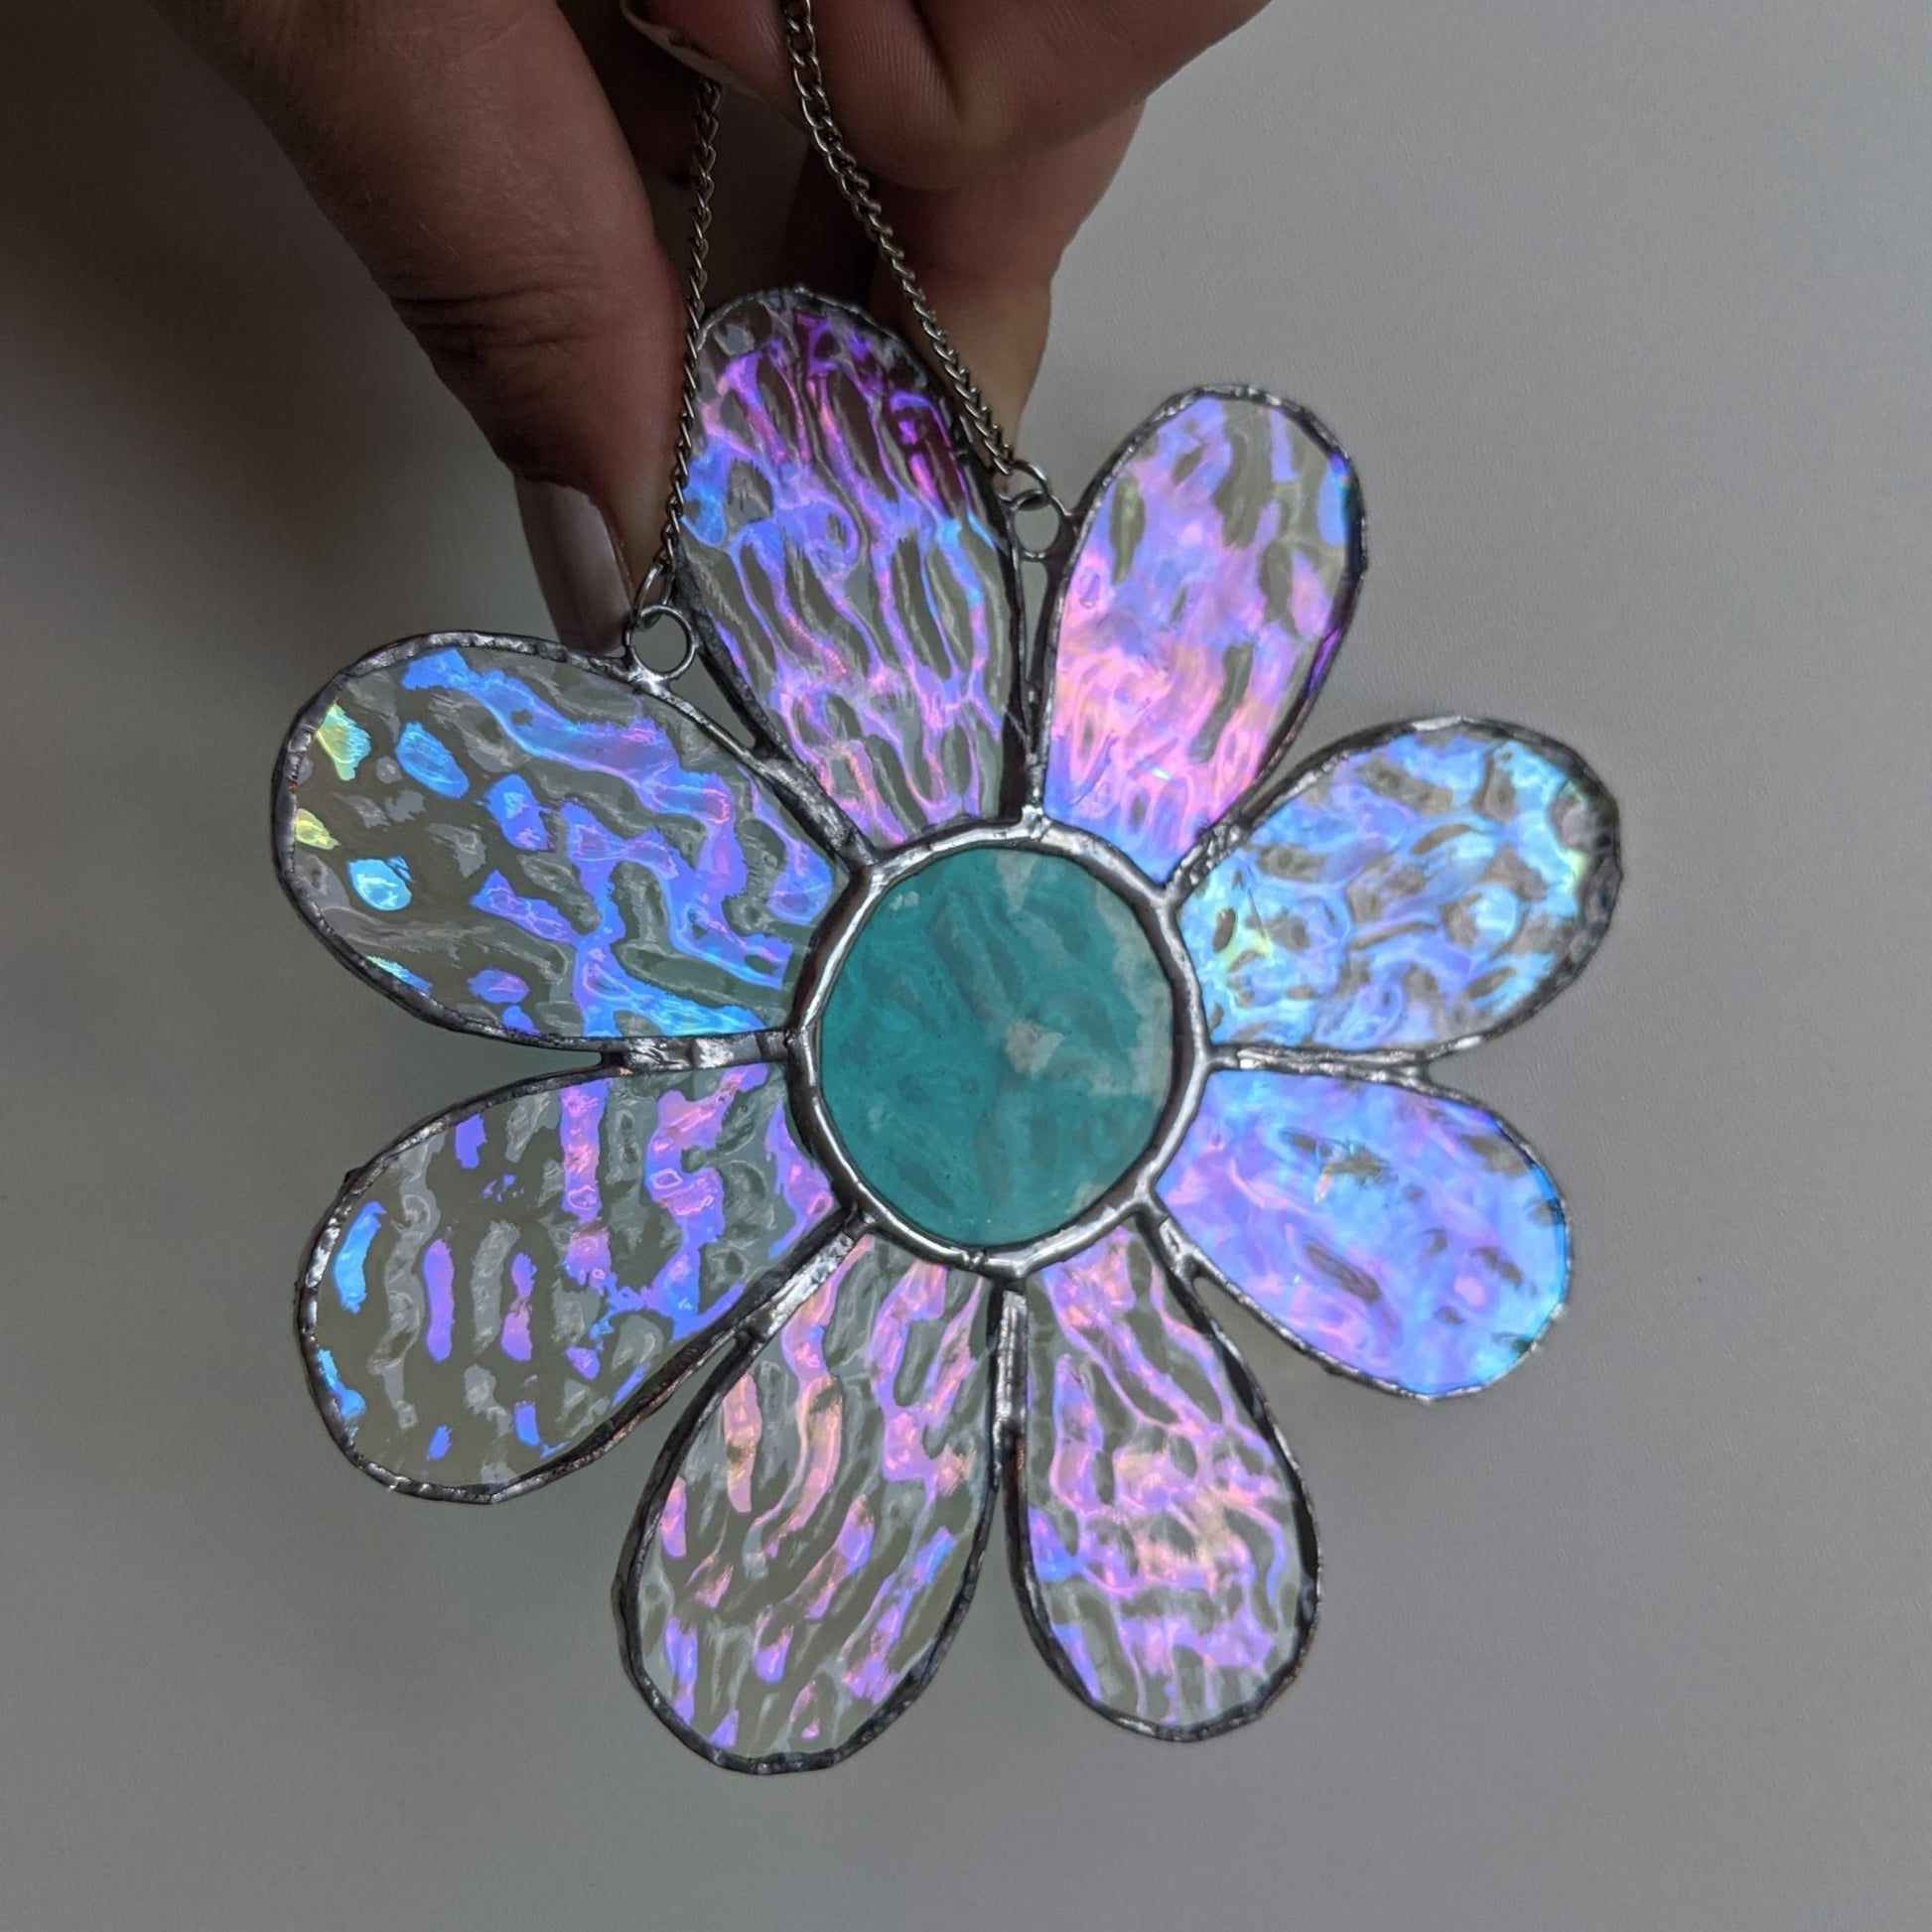 Stained Glass | Iridescent Daisy #1 - Freehand Market -Freehand Market